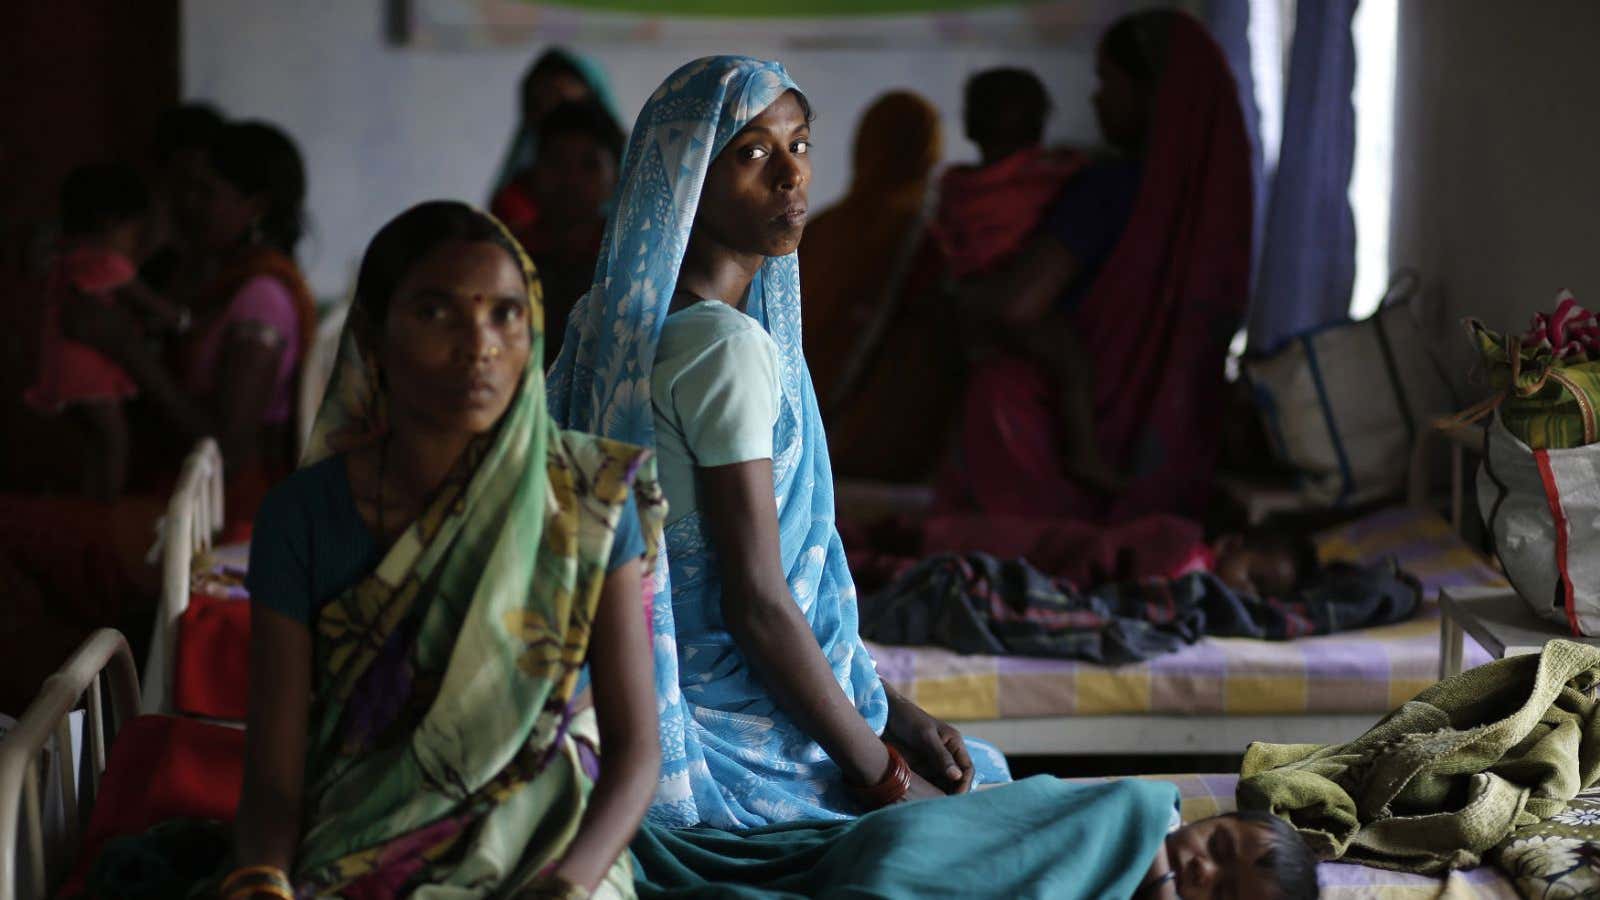 Kekti Bai (C), who underwent a sterilisation surgery at a government mass sterilisation camp, watches while other women sit inside a hospital at Bilaspur district…